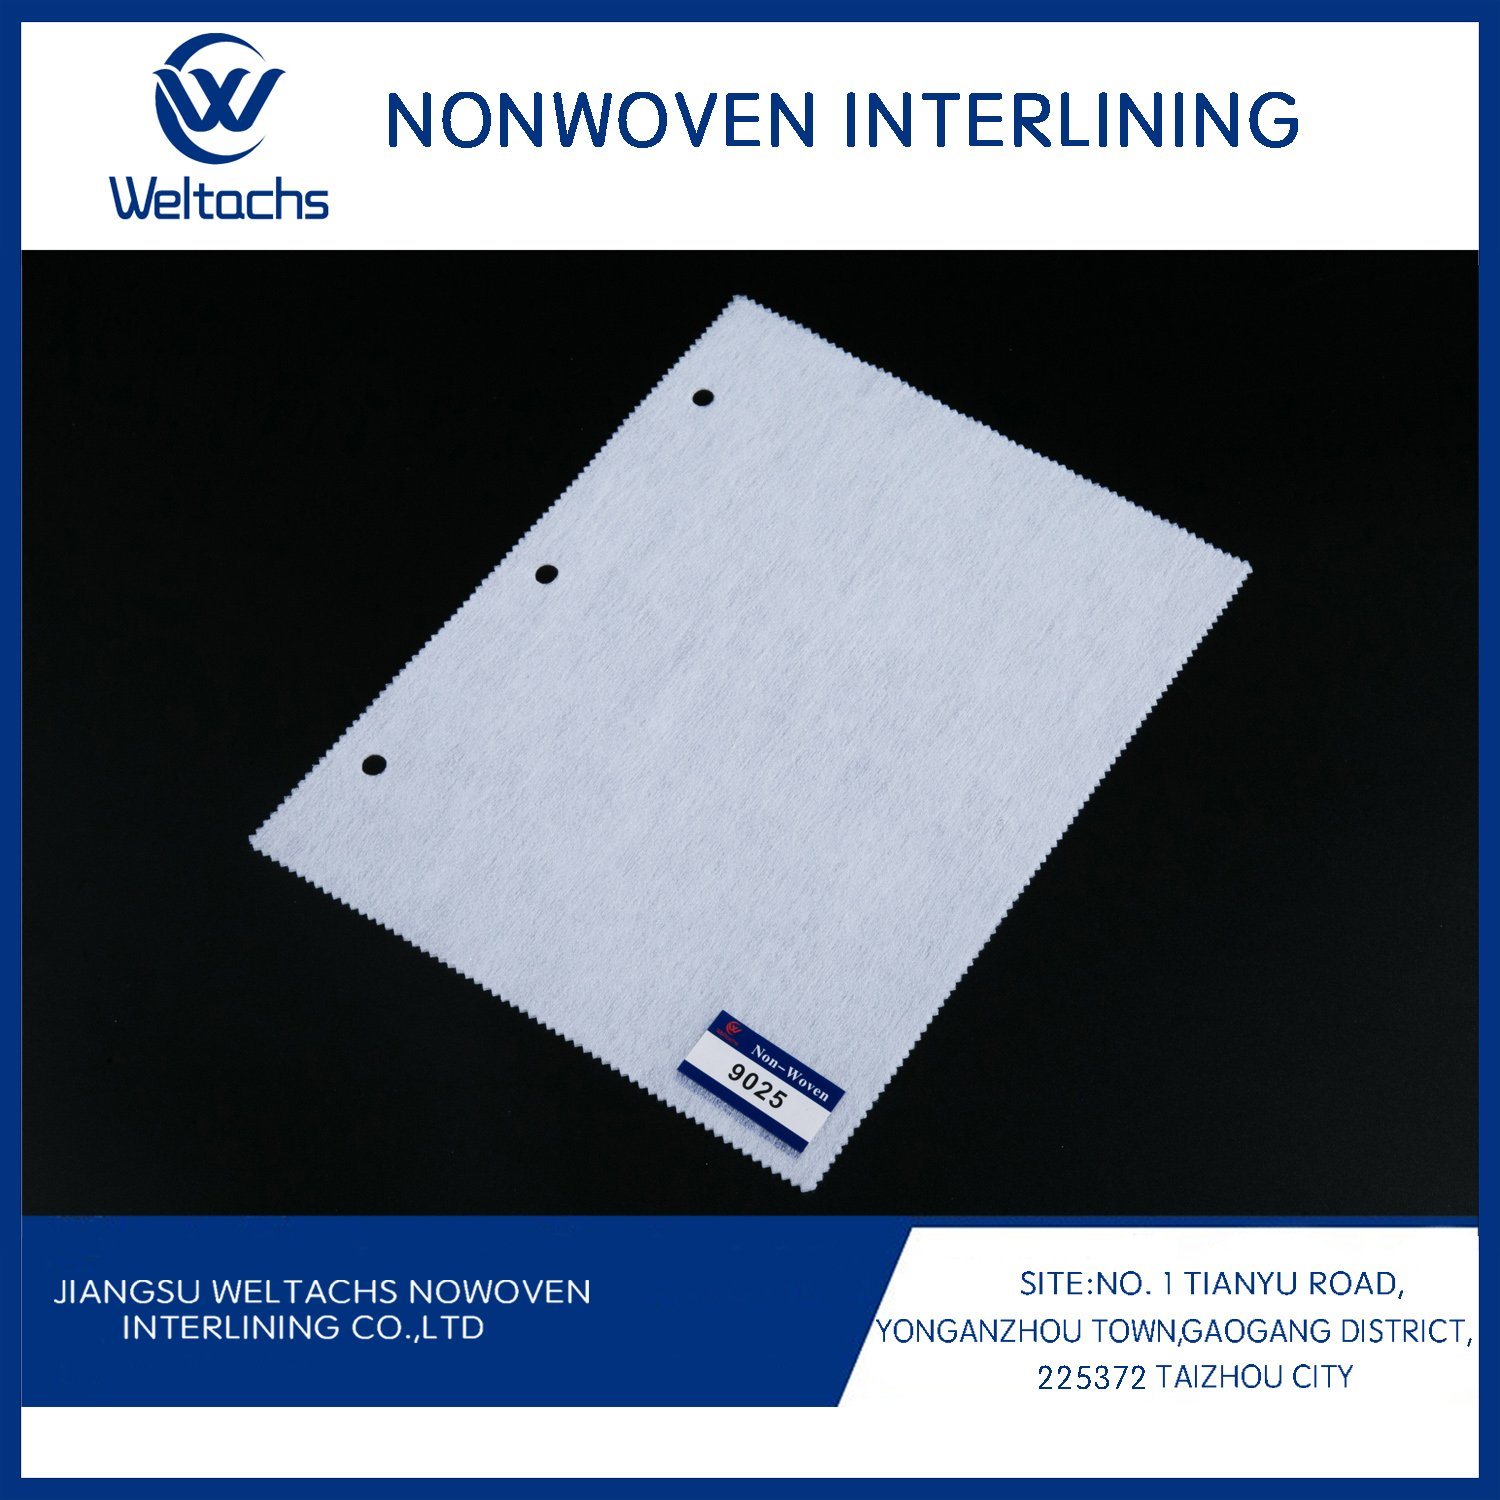 Chemical Bond 100% Polyester Non-Fusing Nonwoven Interlining 1135hb